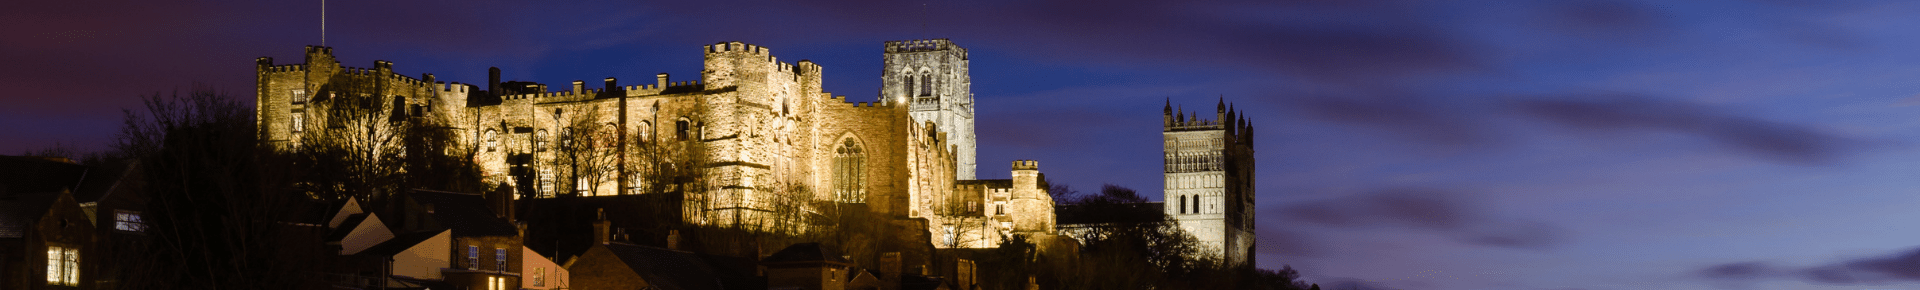 Durham Castle and Cathedral at night